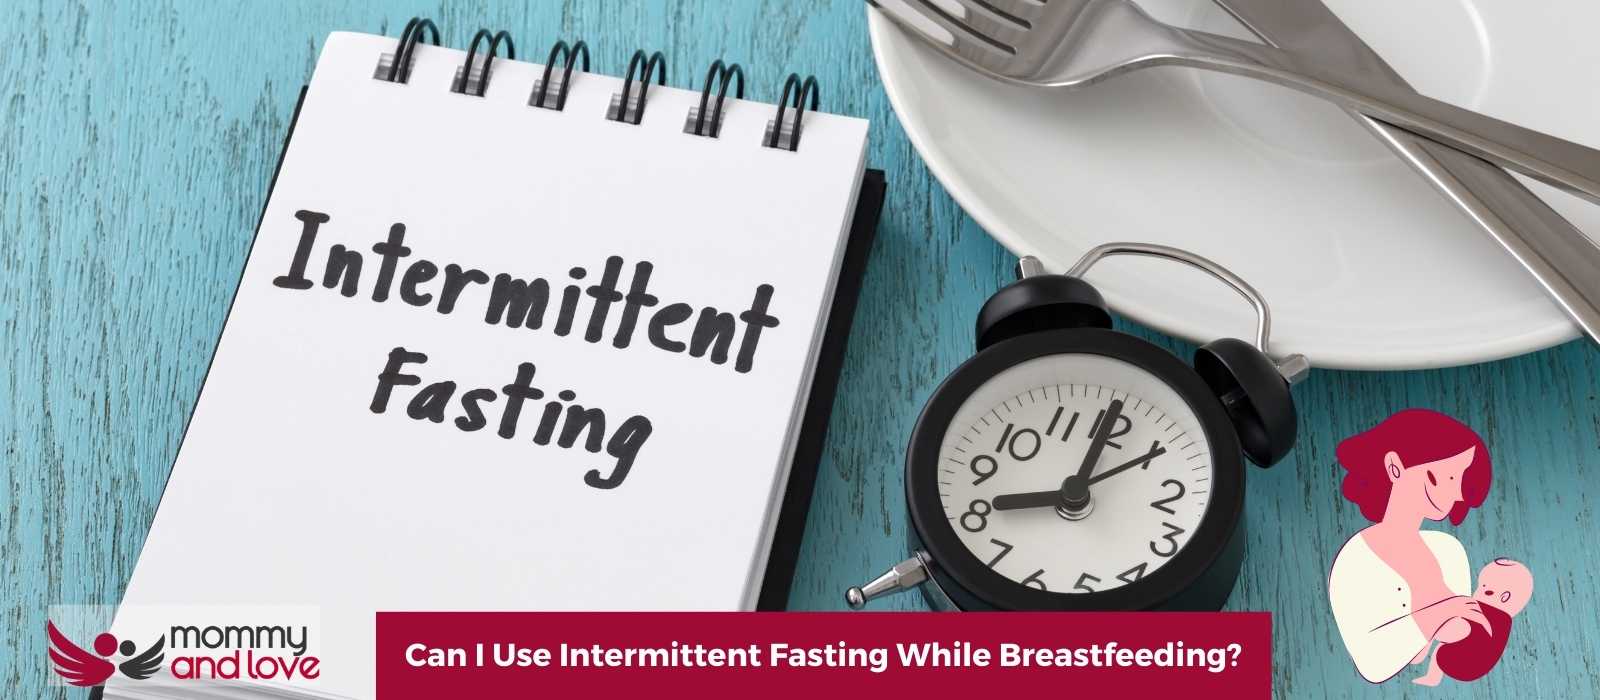 Can I Use Intermittent Fasting While Breastfeeding